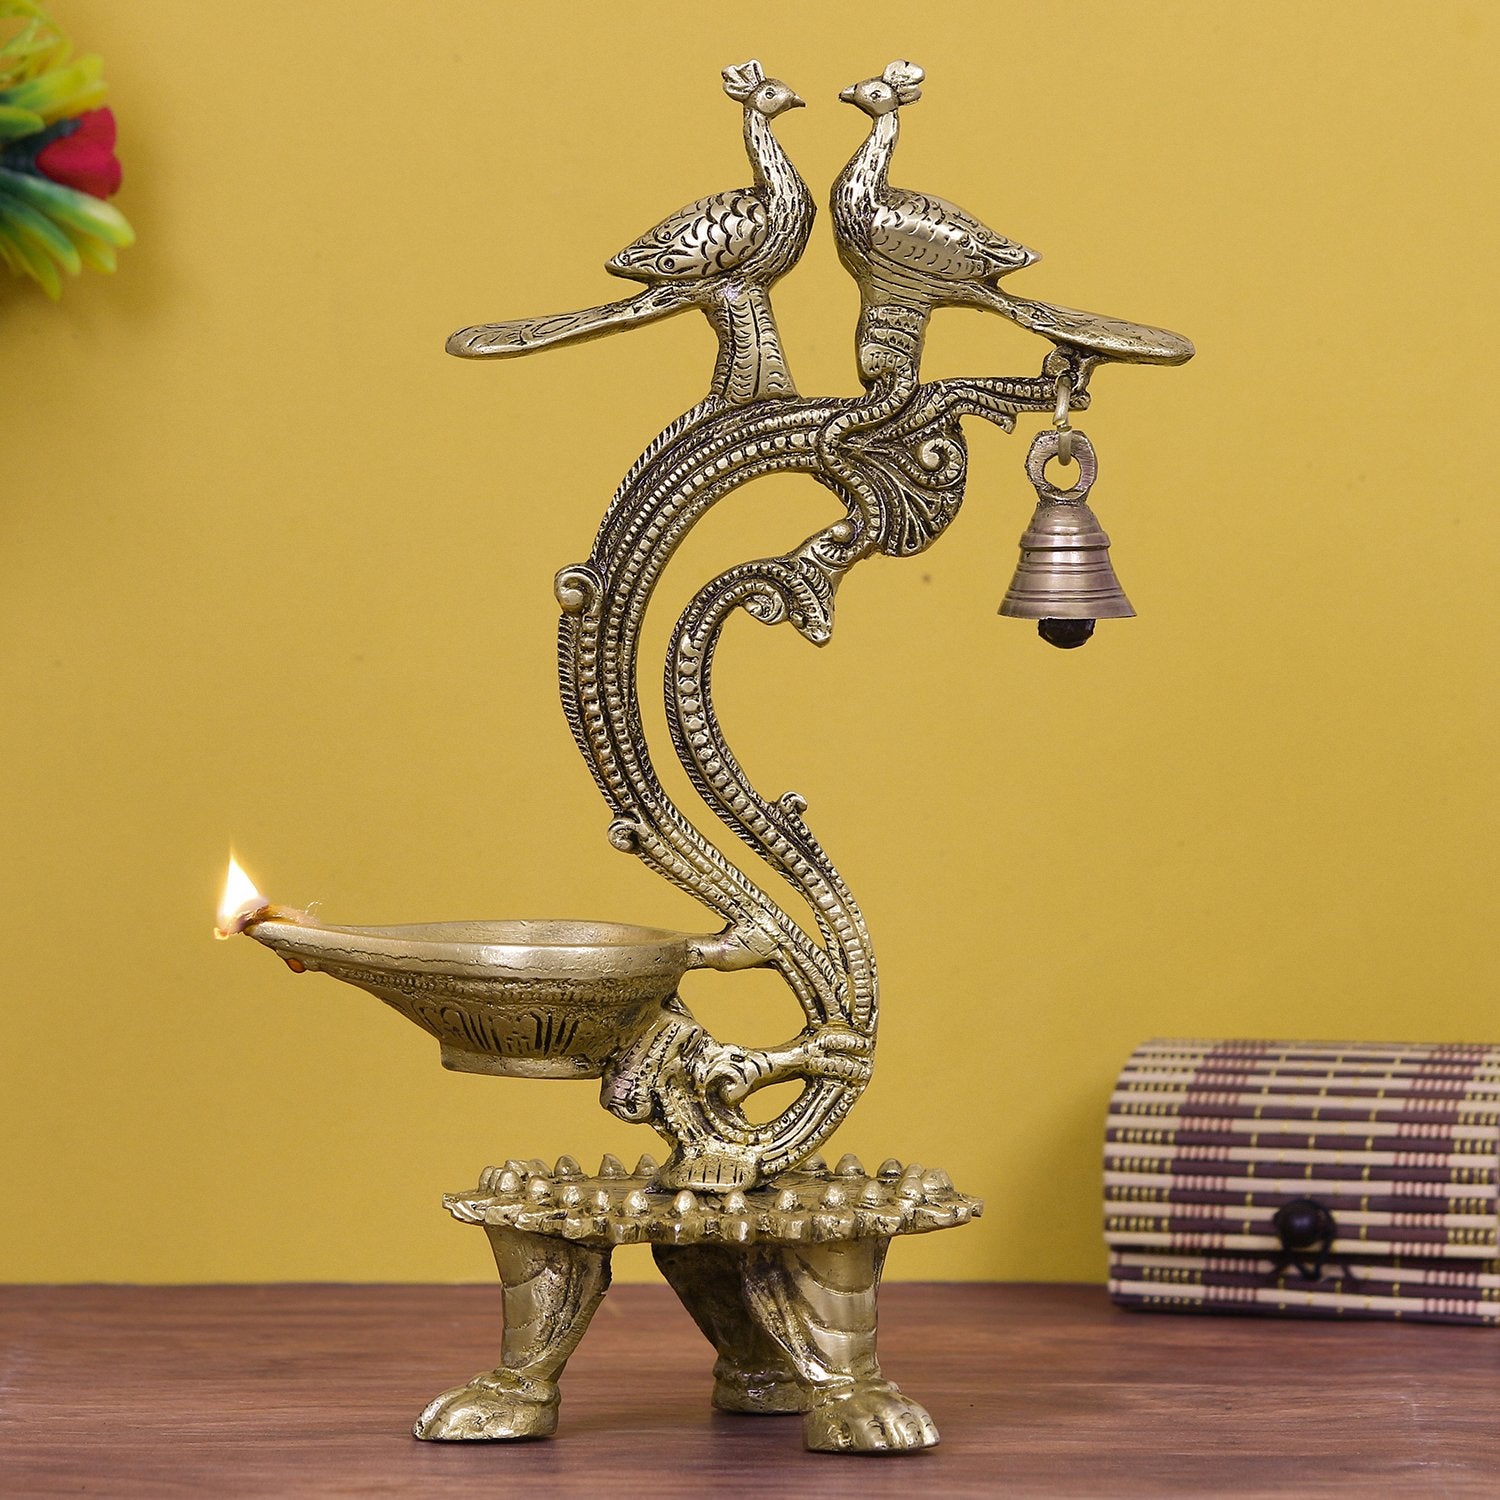 Designer Peacock Rakhi with Antique Finish Decorative Handcrafted Brass Peacock Wall Hanging Diya with Bells and Roli Chawal Pack, Best Wishes Greeting Card 2